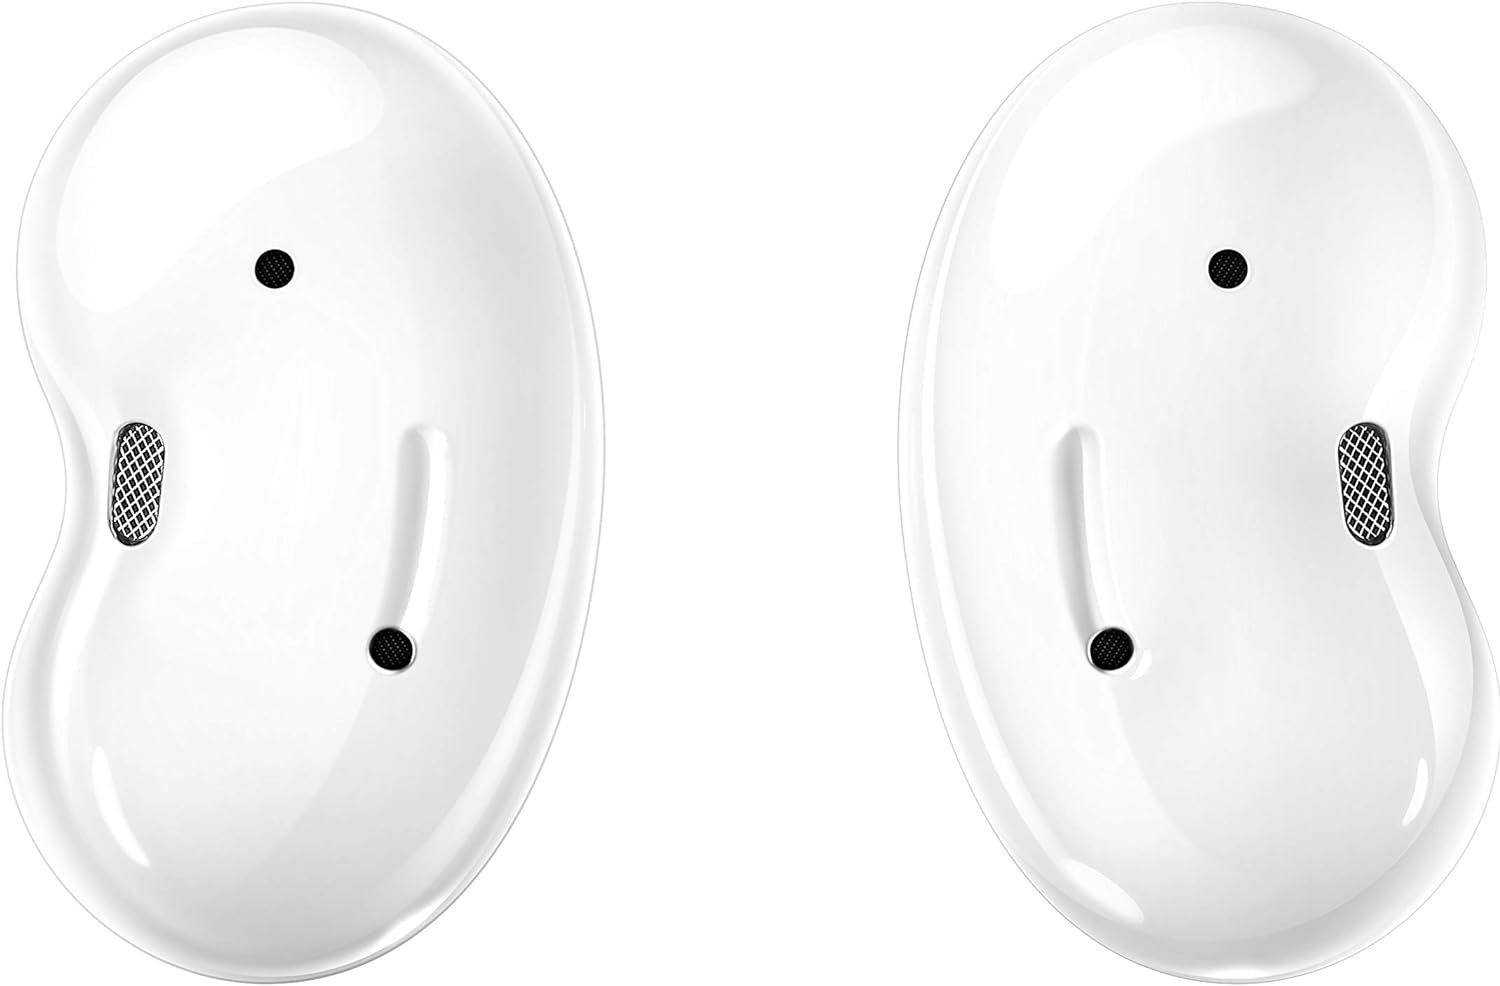 Samsung Galaxy Buds Live in Mystic White - Rich 12mm speakers tuned by AKG for immersive sound experience. 8806090556470